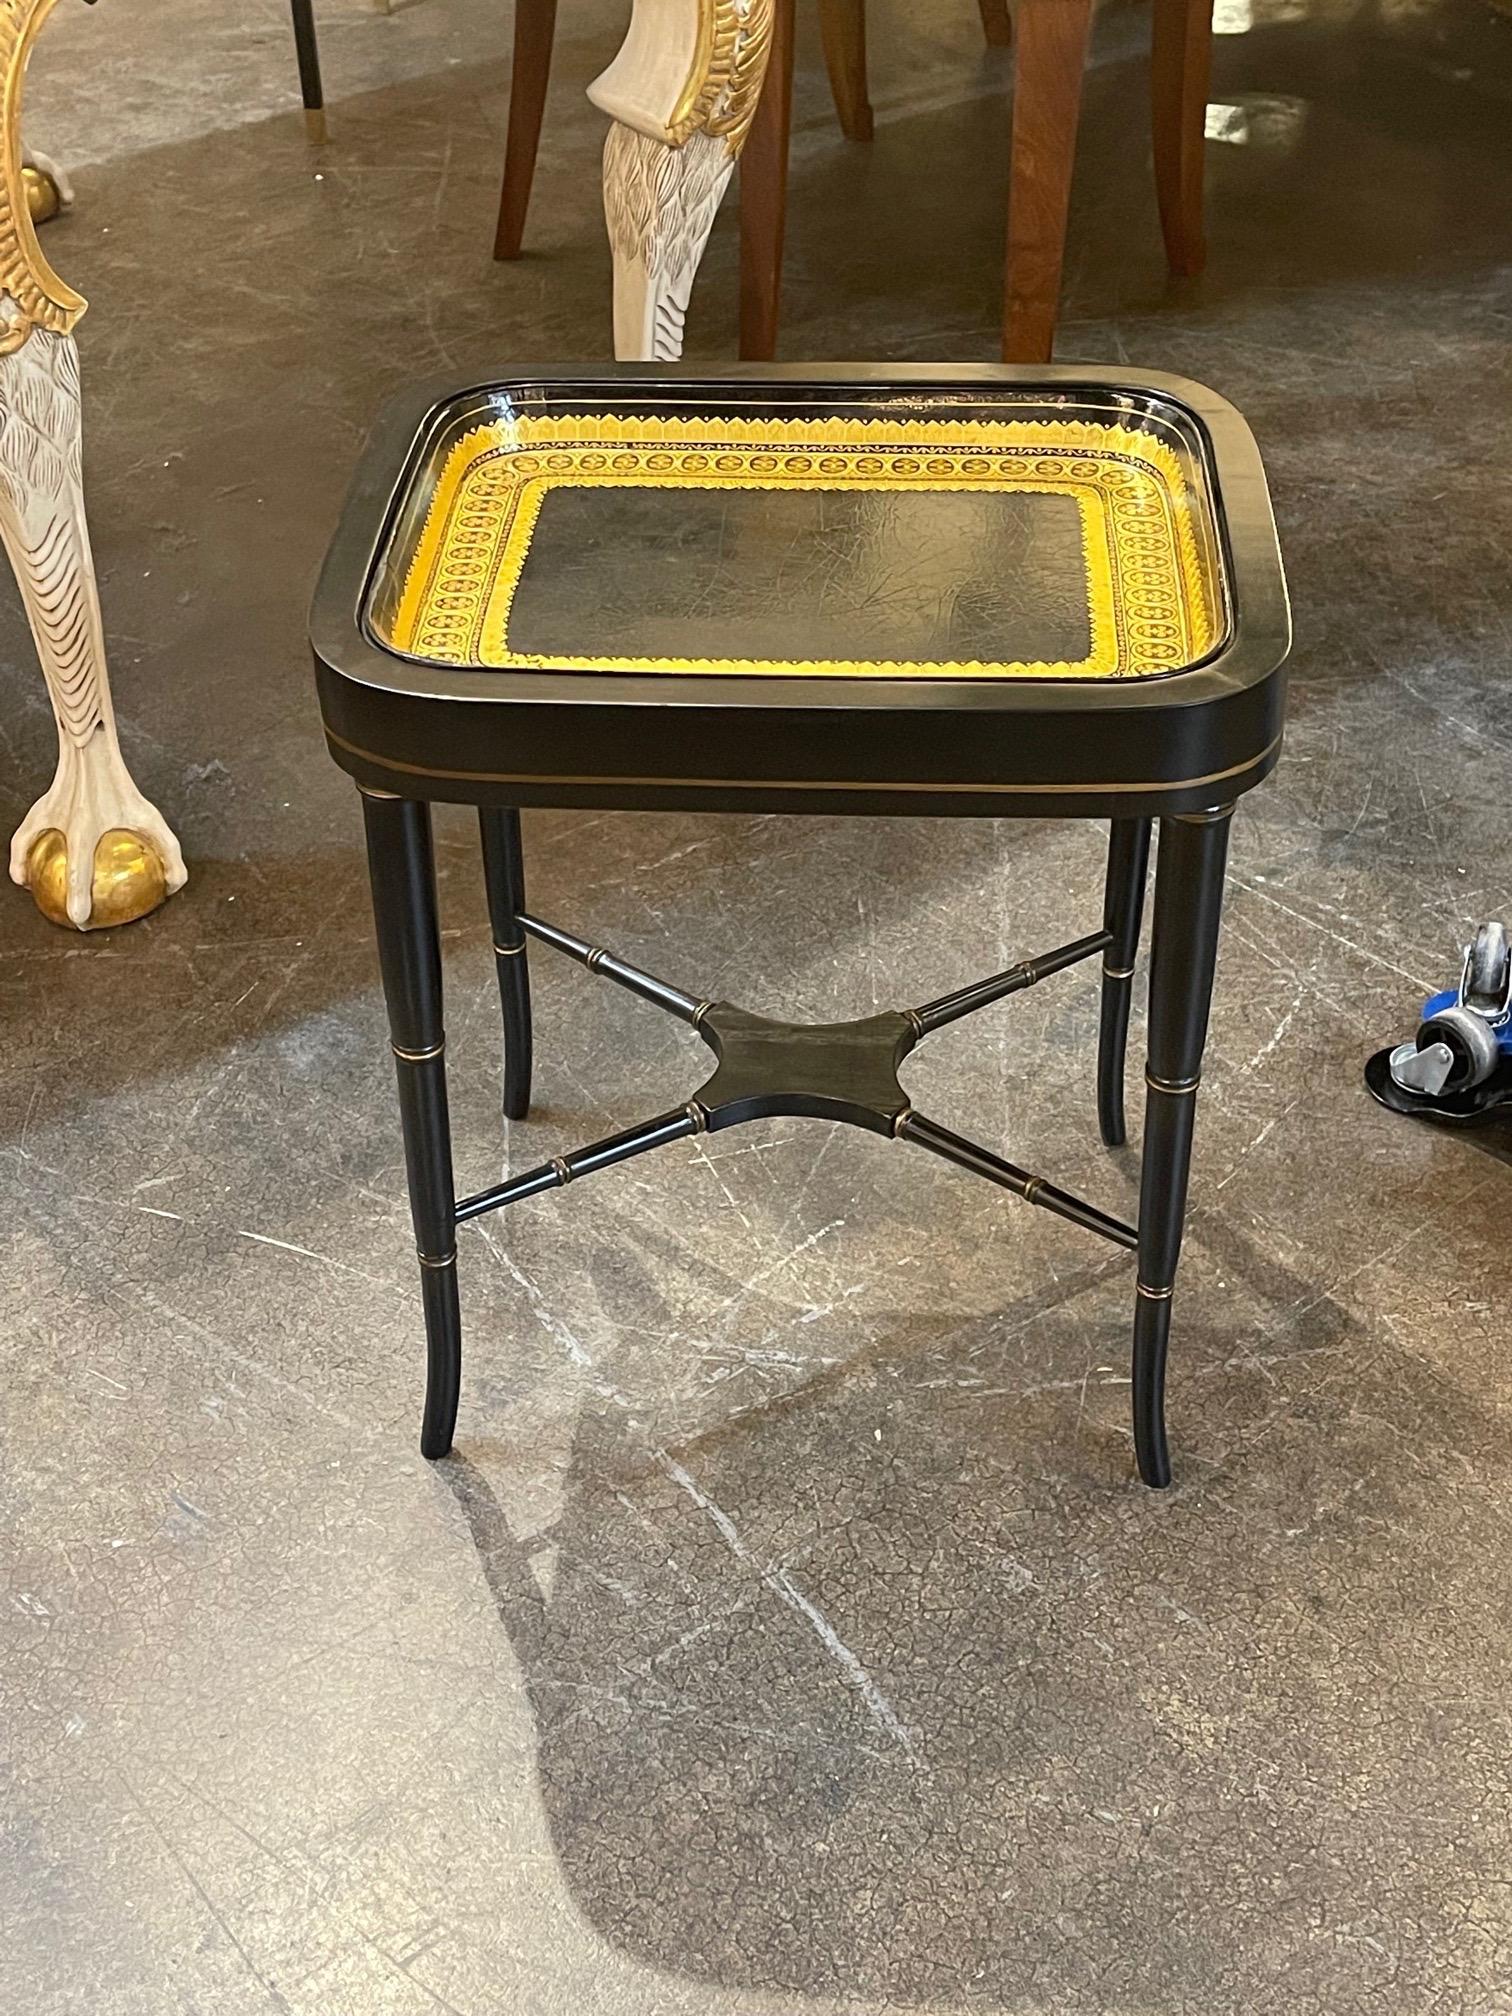 Beautiful decorative 19th century English Regency style paper mache' tray table with lovely gold pattern. Notice that the tray come off. A great accent piece. So pretty!